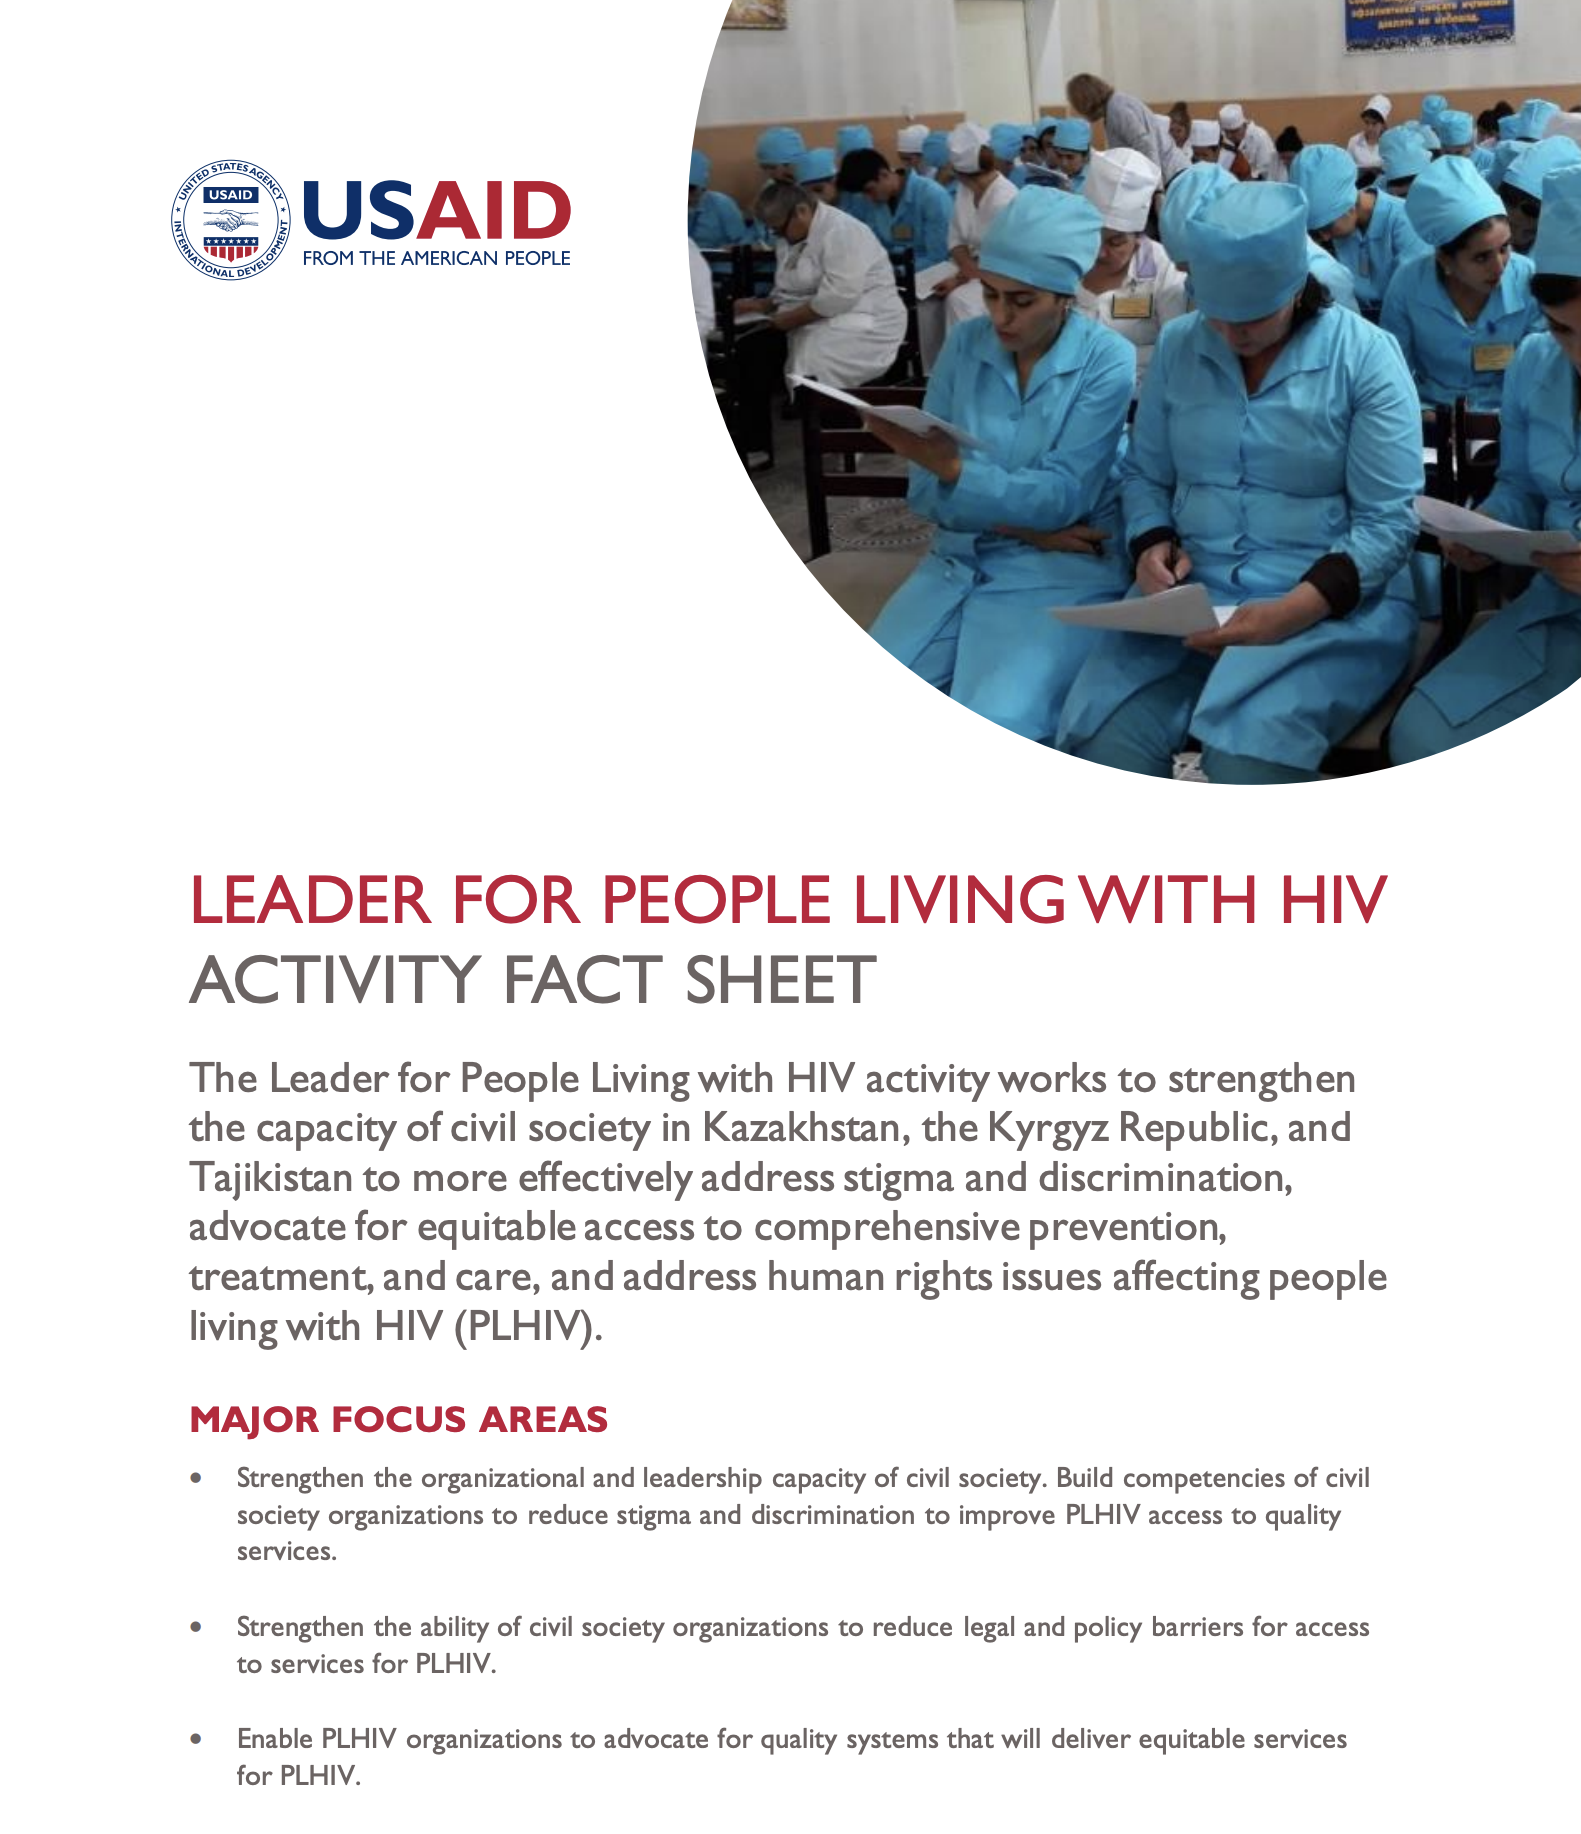 Leader for People Living with HIV 